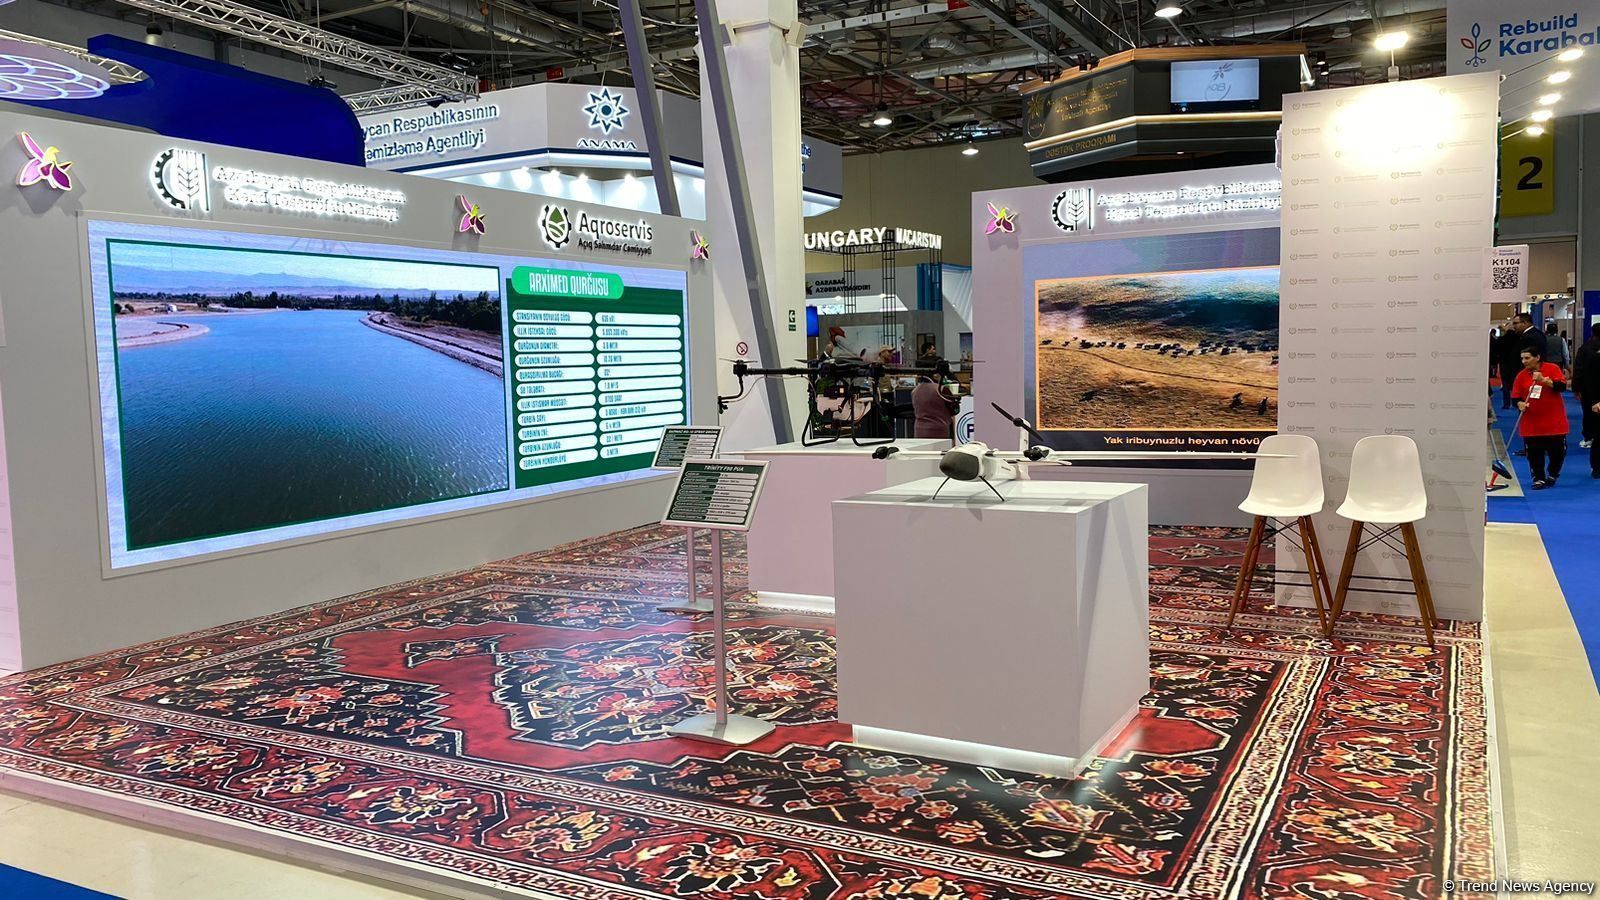 Second day of int'l exhibitions in Baku kicks off [PHOTO]